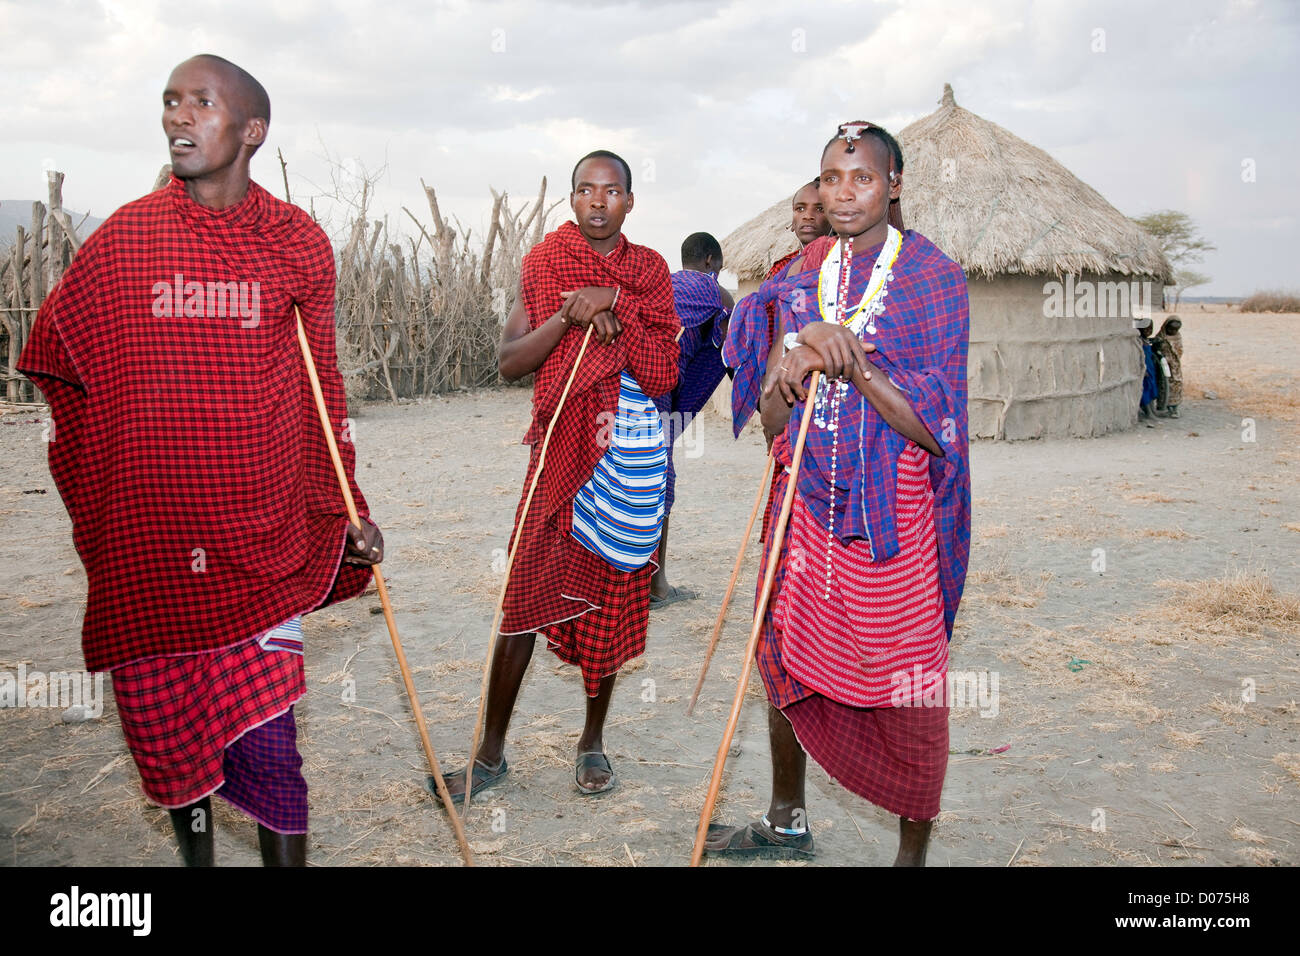 A group of Maasai Worriers at Tanzania;East Africa;Africa;Authentic Cultural Village in Olpopongi;Maasai Men Worrier Stock Photo